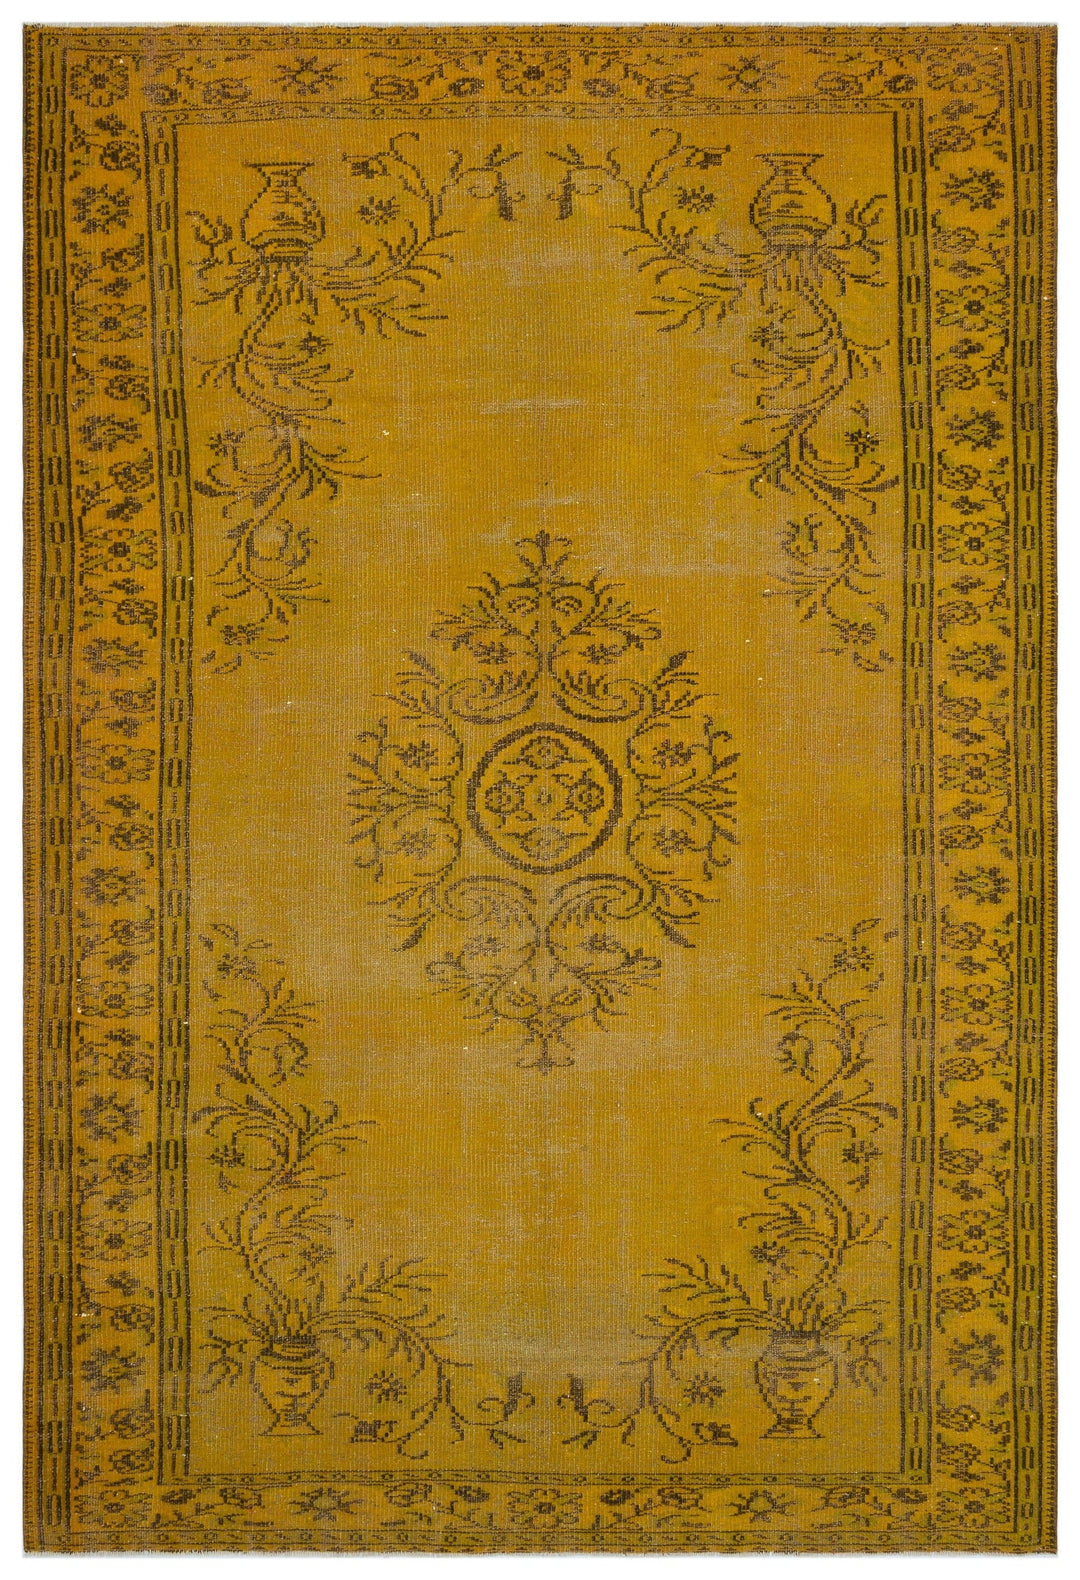 Athens Yellow Tumbled Wool Hand Woven Carpet 196 x 294